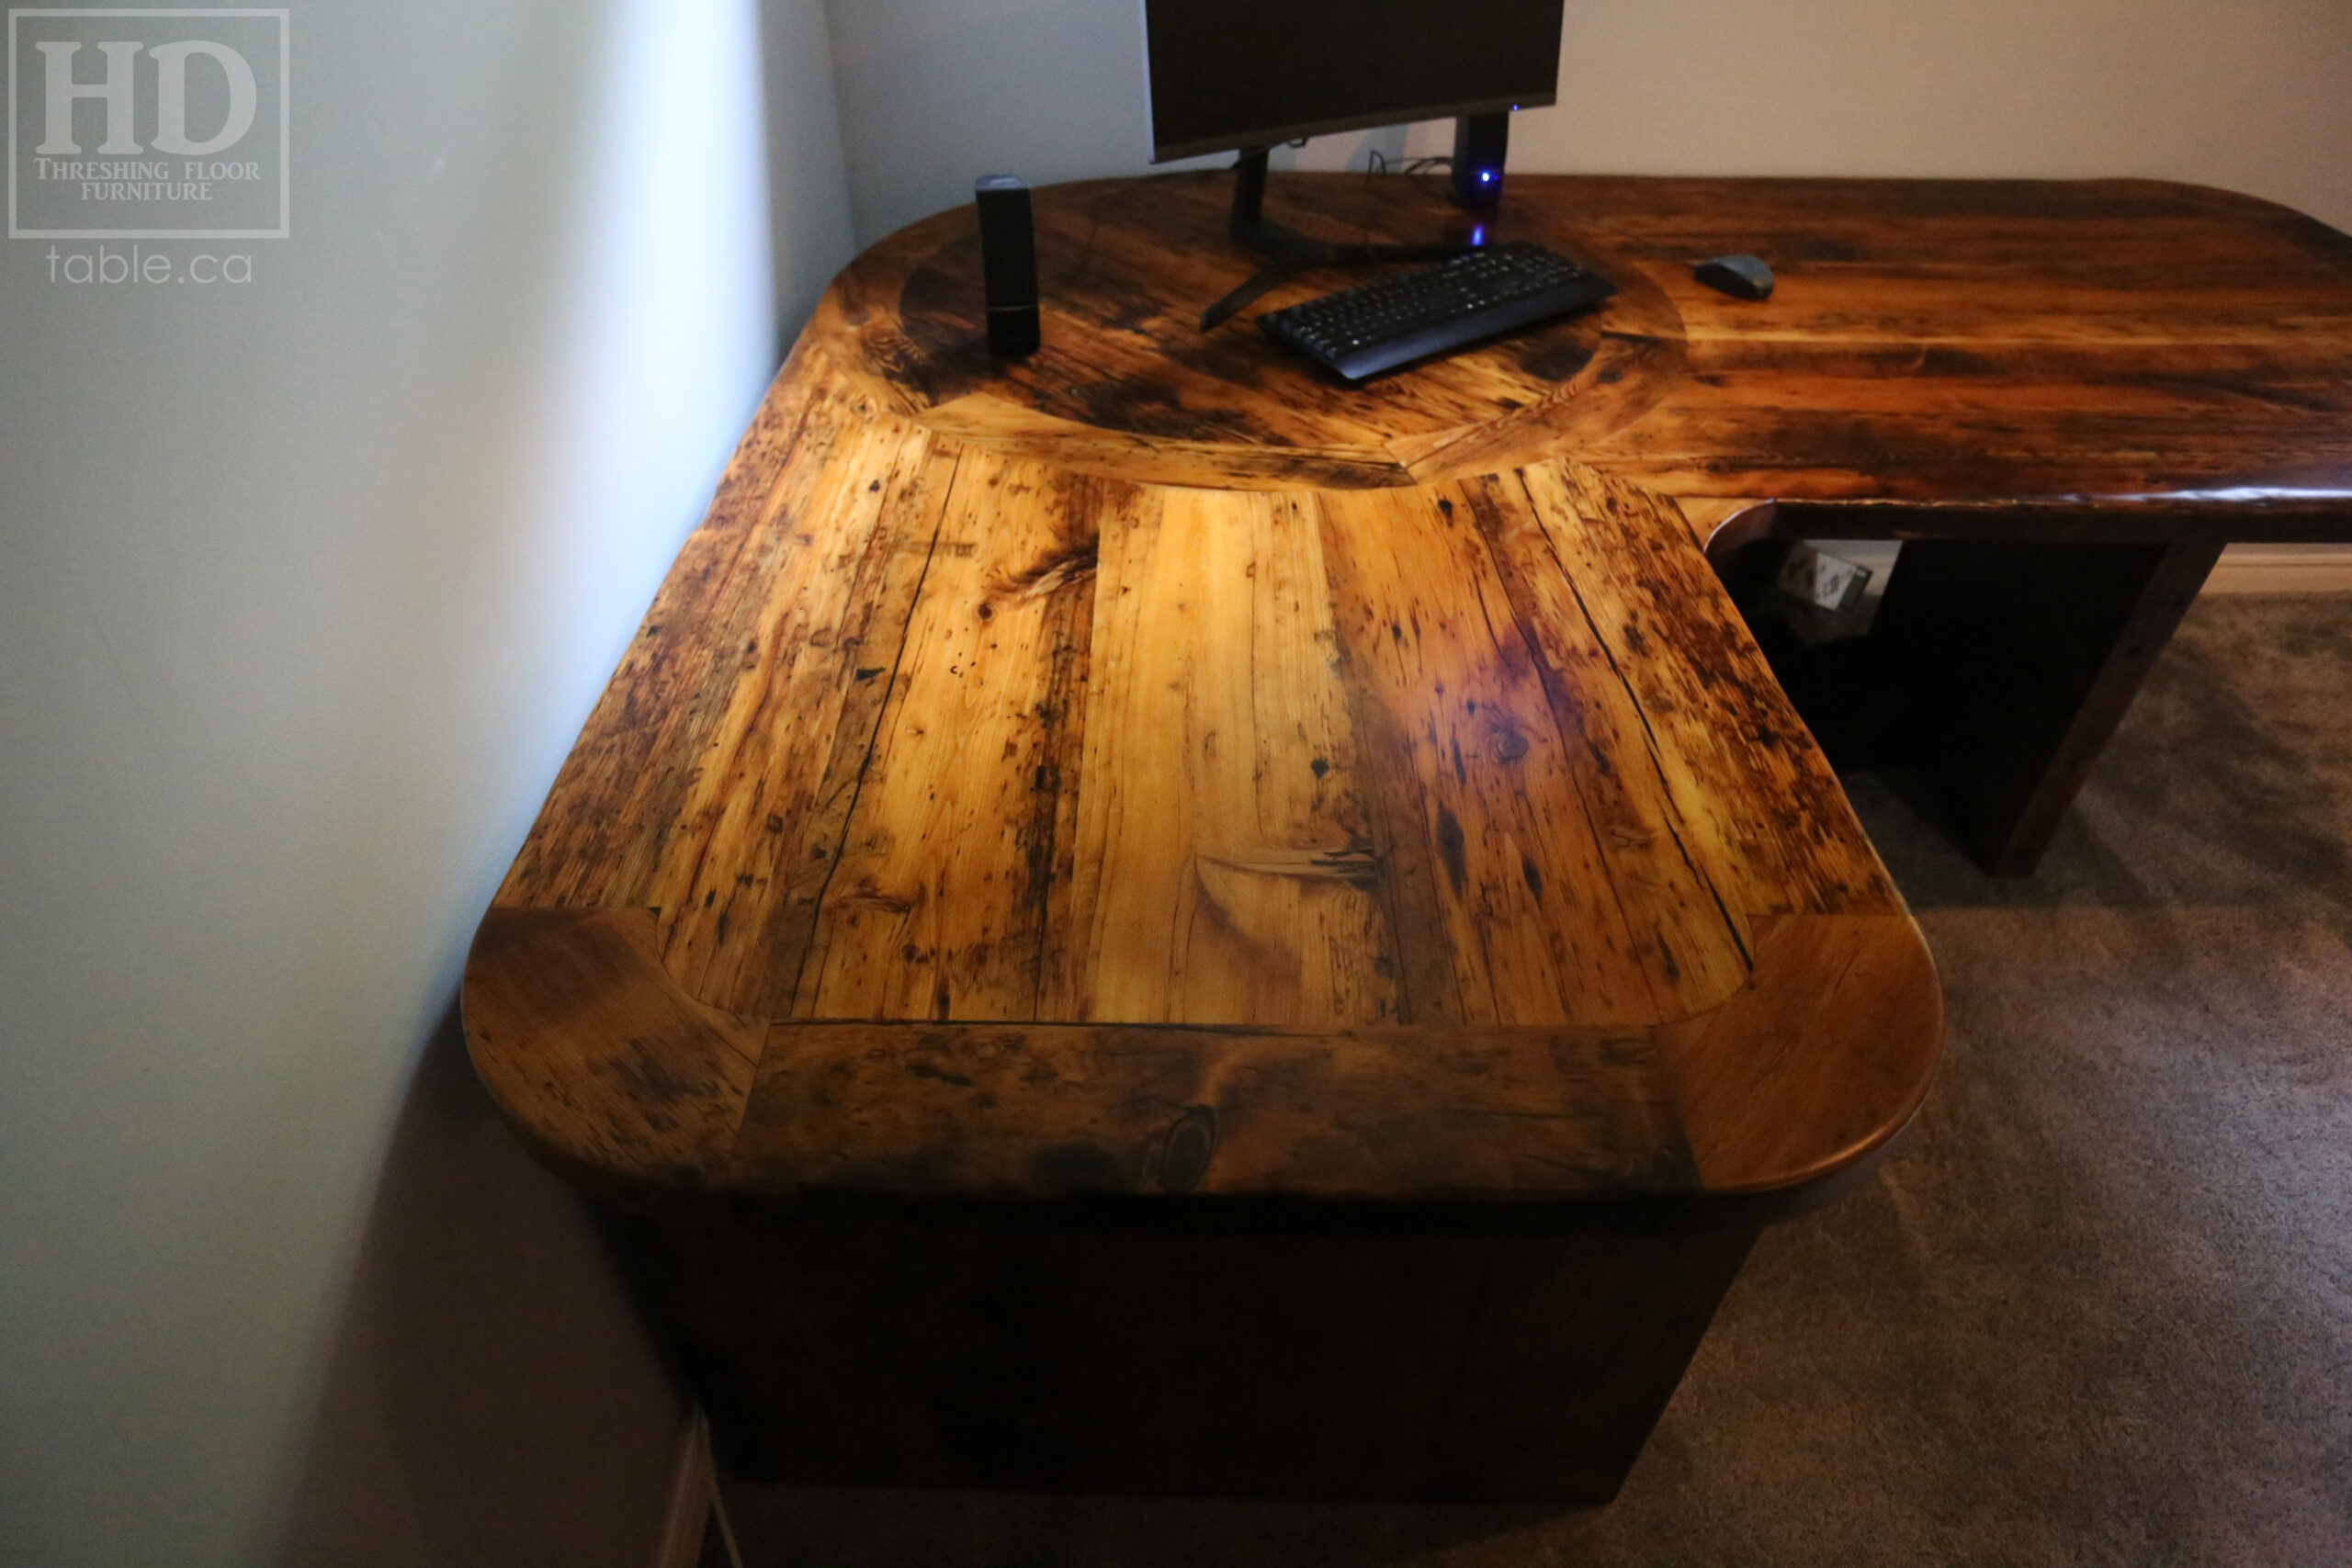 Ontario Barnwood L Shaped Desk we made for a Waterloo, Ontario home office - Reclaimed Hemlock Threshing Floor & Grainery Board Construction – 2 Drawers / Mission Cast Brass Lee Valley Hardware – Plank Post - Original edges & distressing maintained – Premium epoxy + satin polyurethane finish - www.table.ca